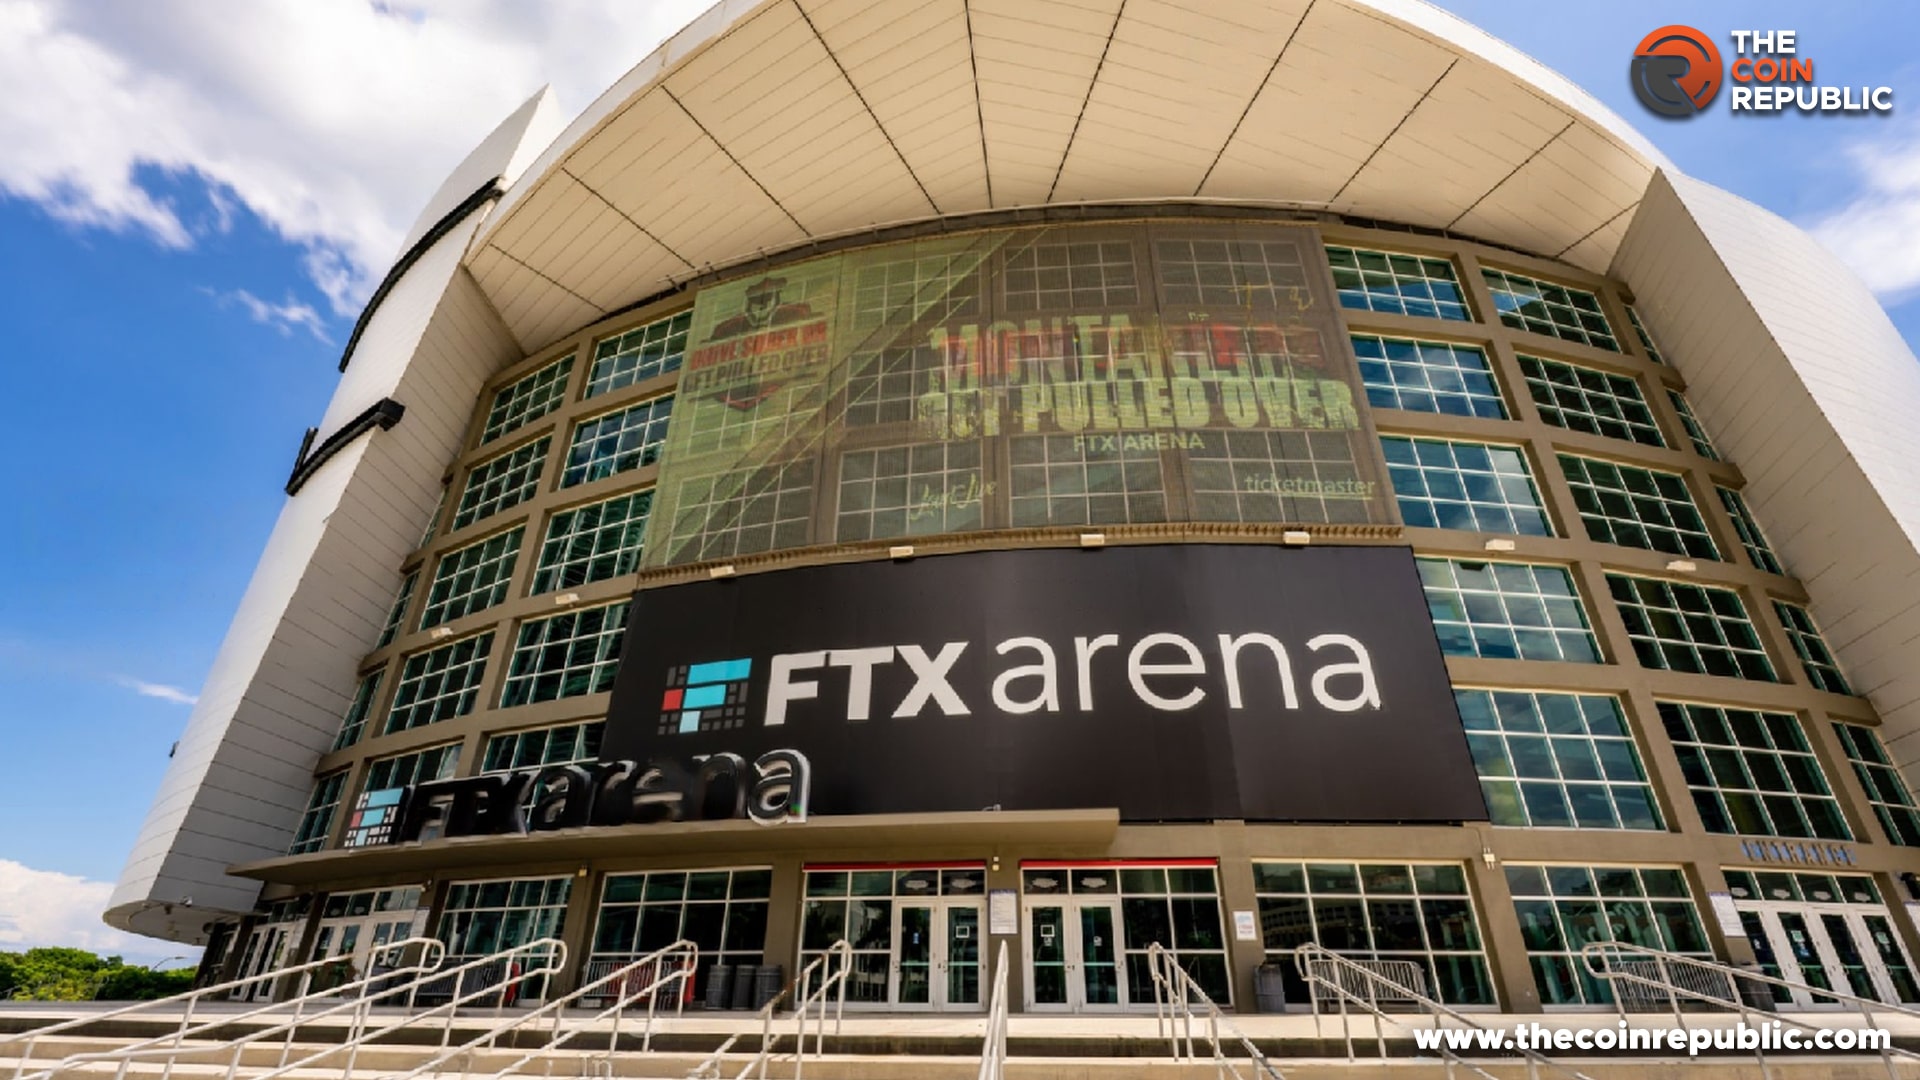 Miami Heat Moves Away From The FTX Exchange ‘Heat’